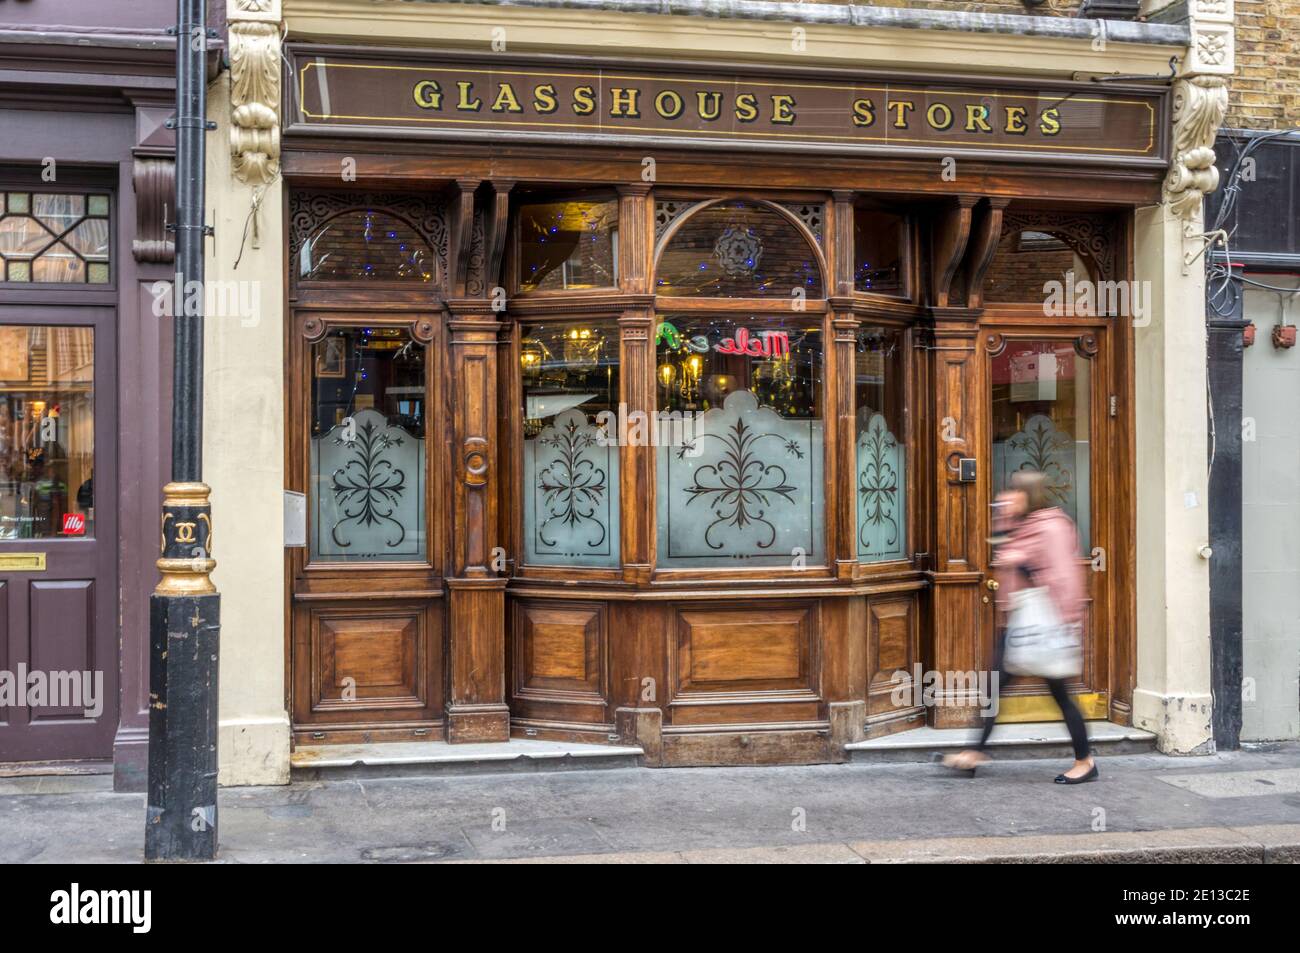 The Glasshouse Stores public house in Brewer Street, Soho. Stock Photo